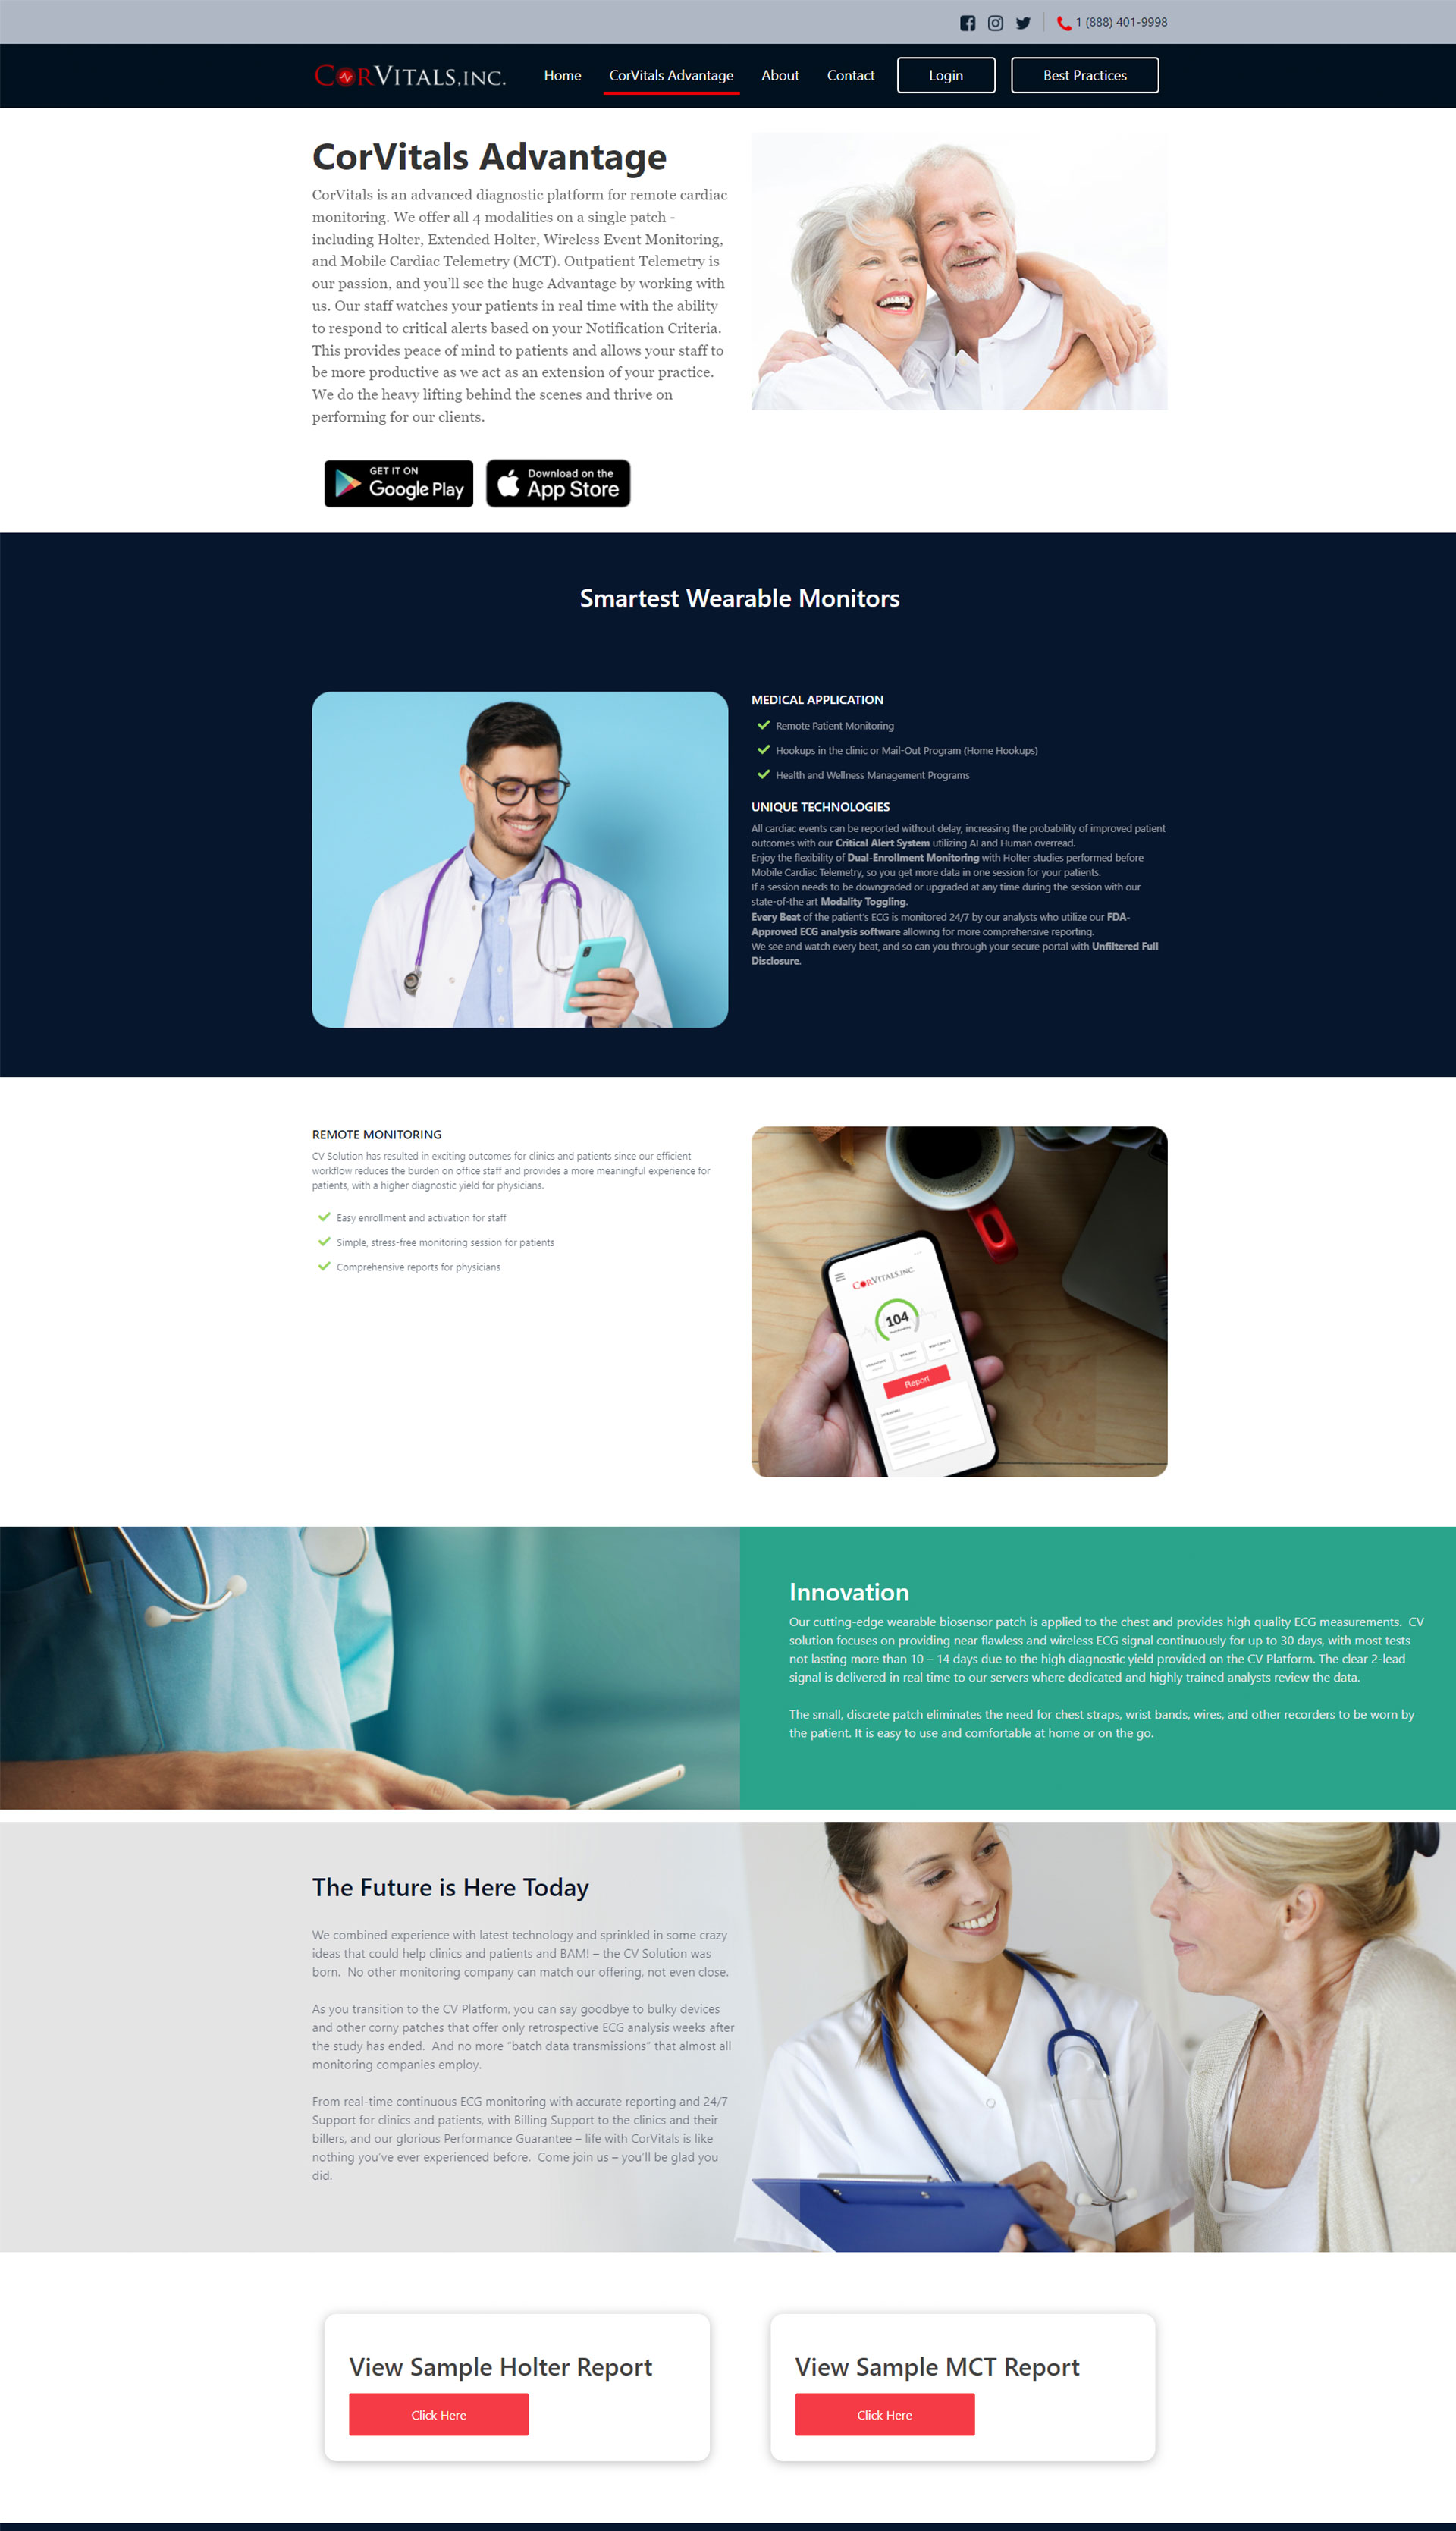 Web Design product page for CorVitals